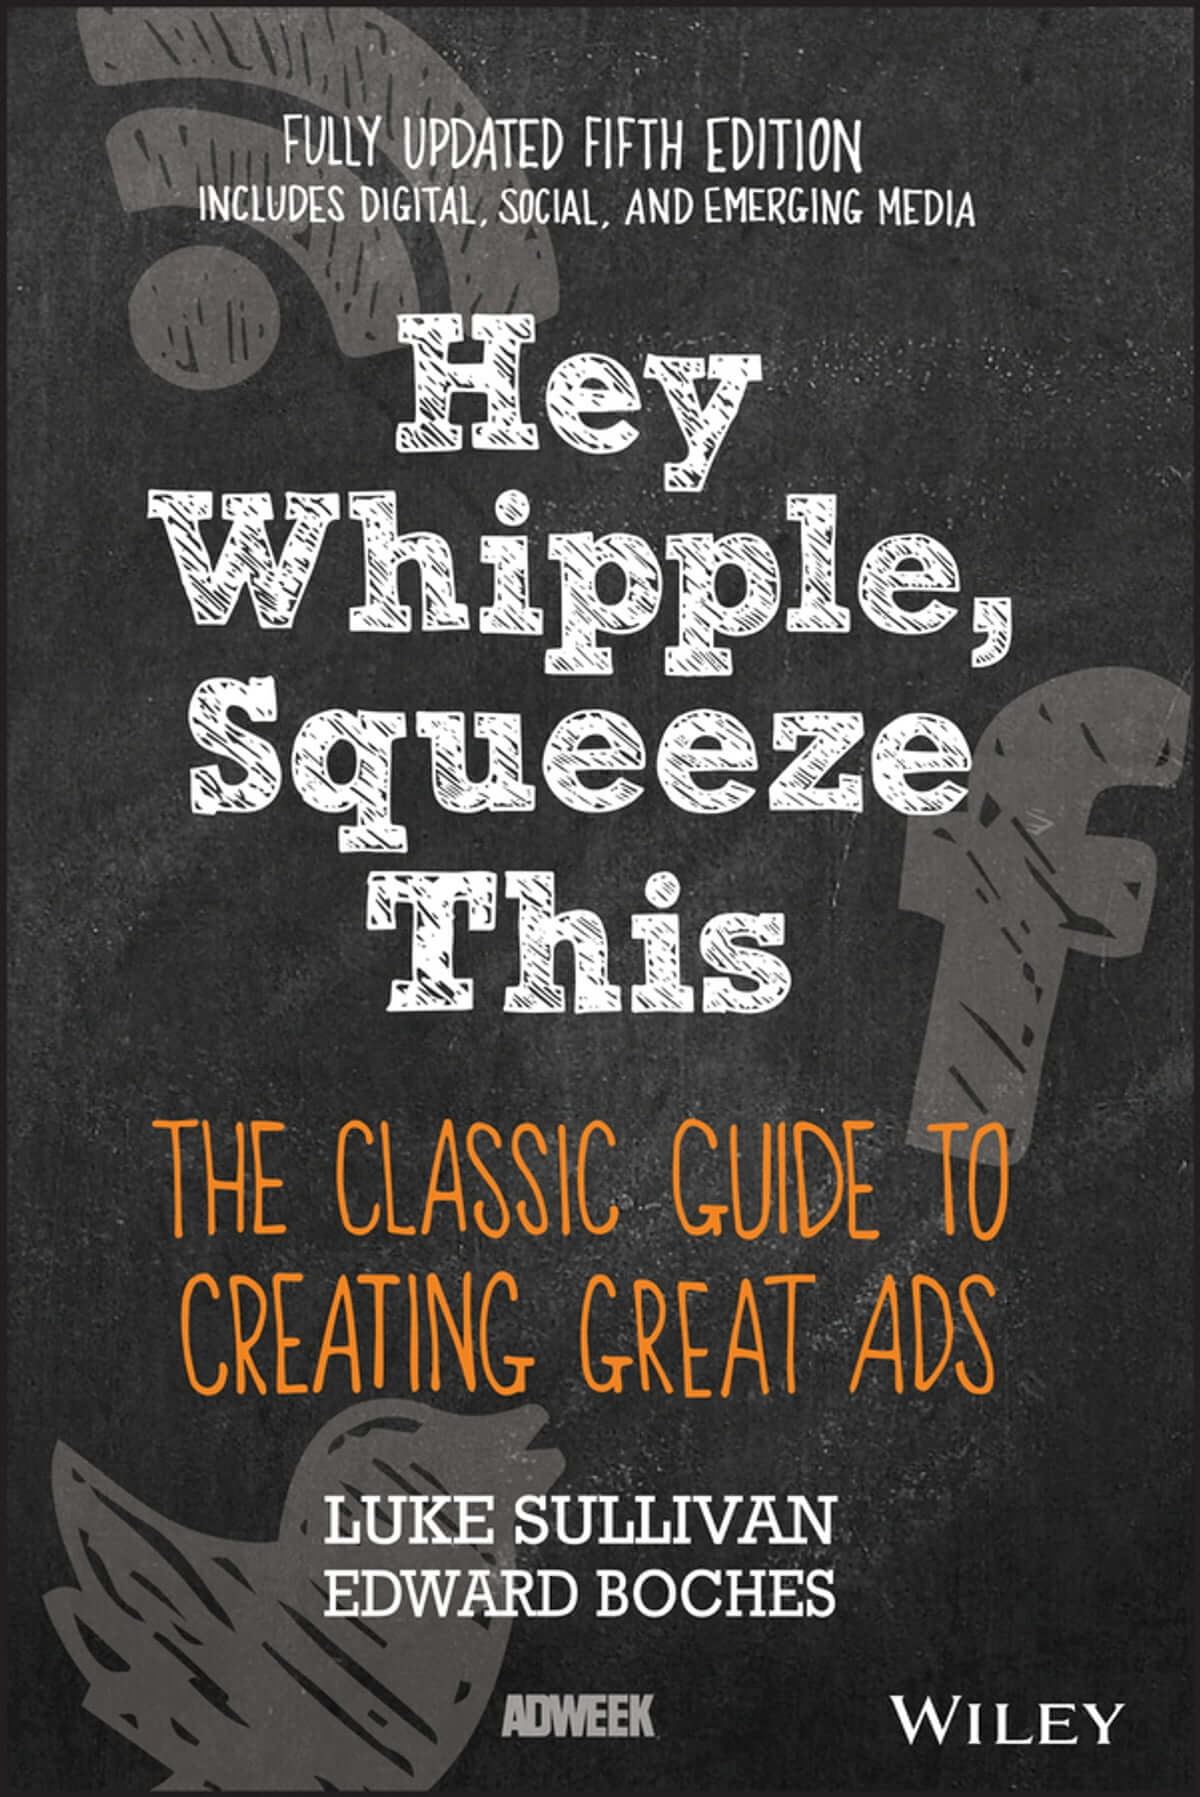 Book Cover of Luke Sullivan and Edward Boche's "Hey Whipple, Squeeze This"